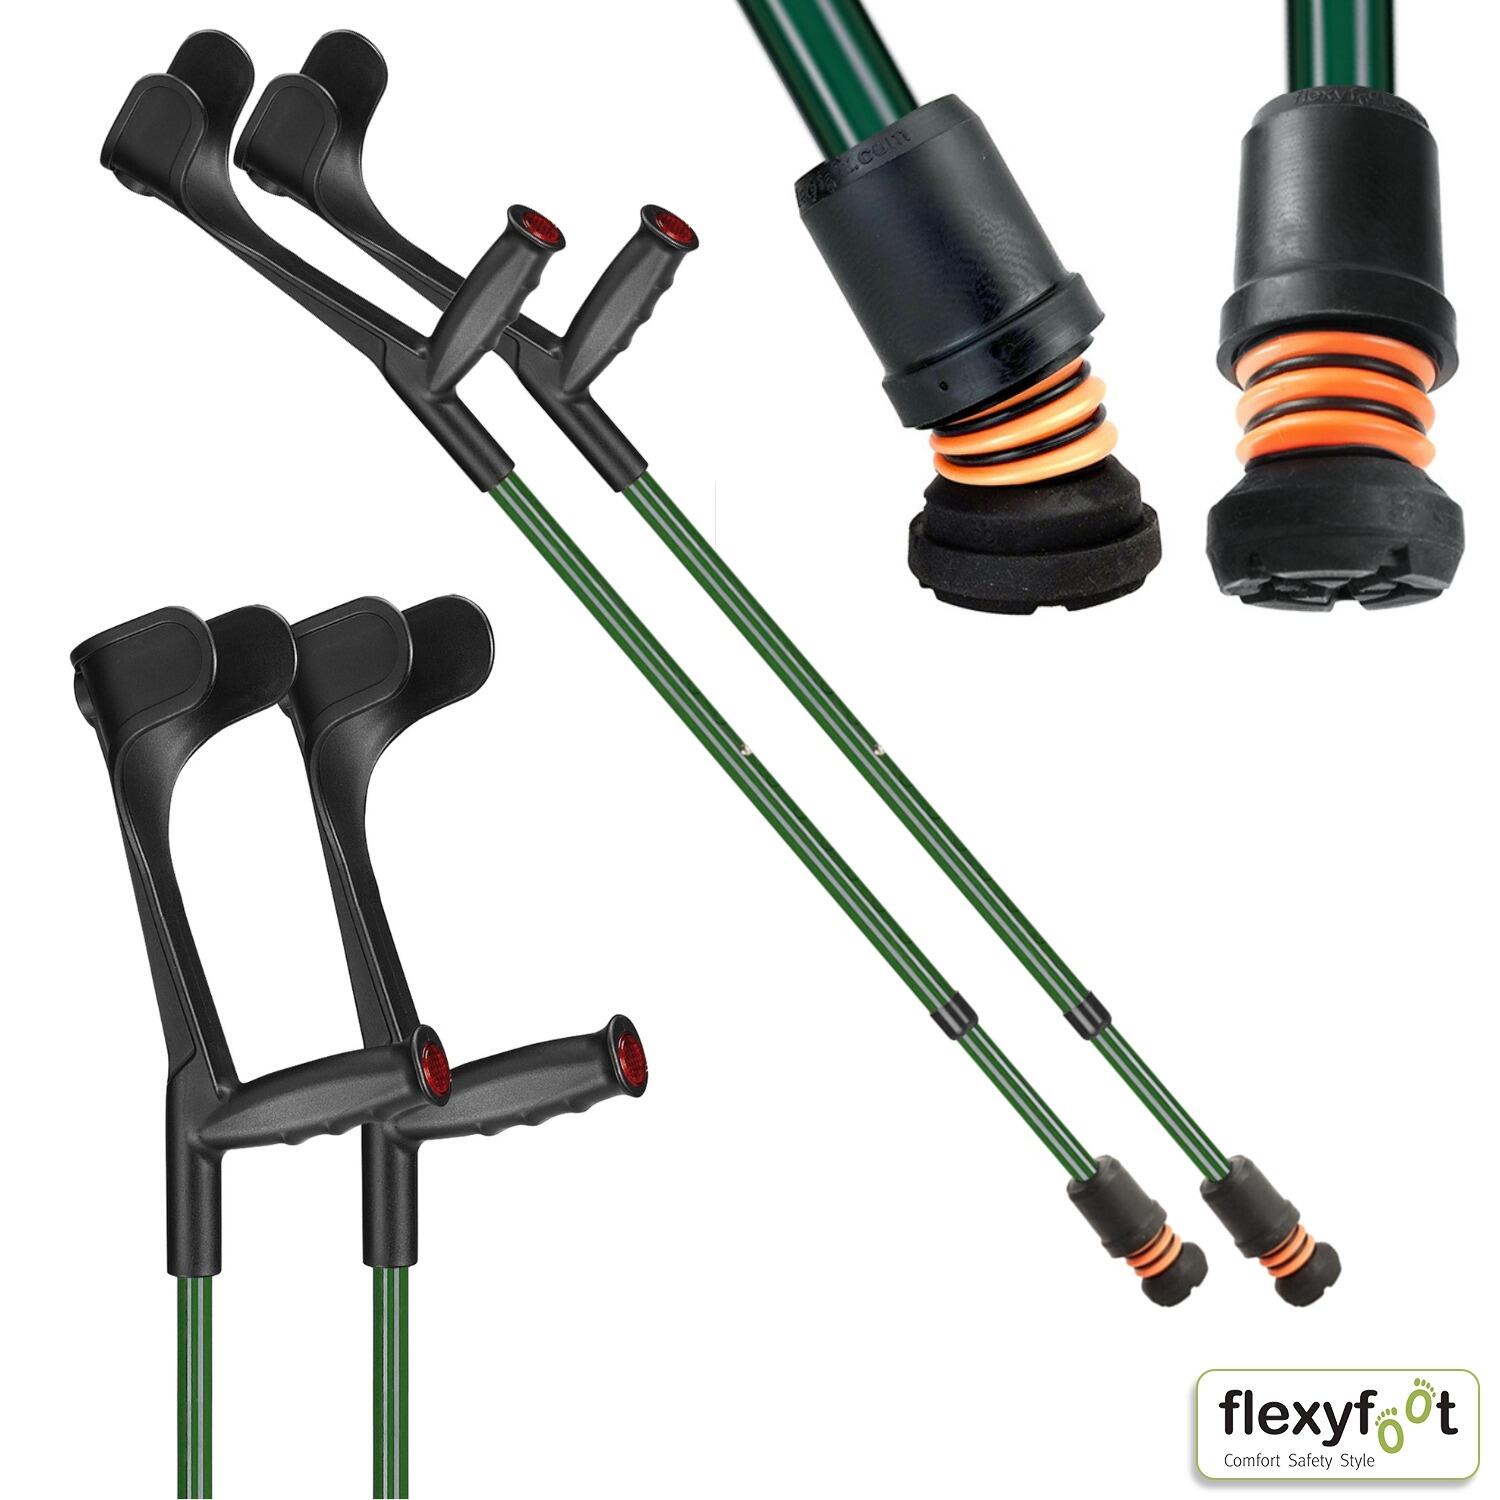 A pair of British Racing Green Flexyfoot Soft Grip Open Cuff Crutches